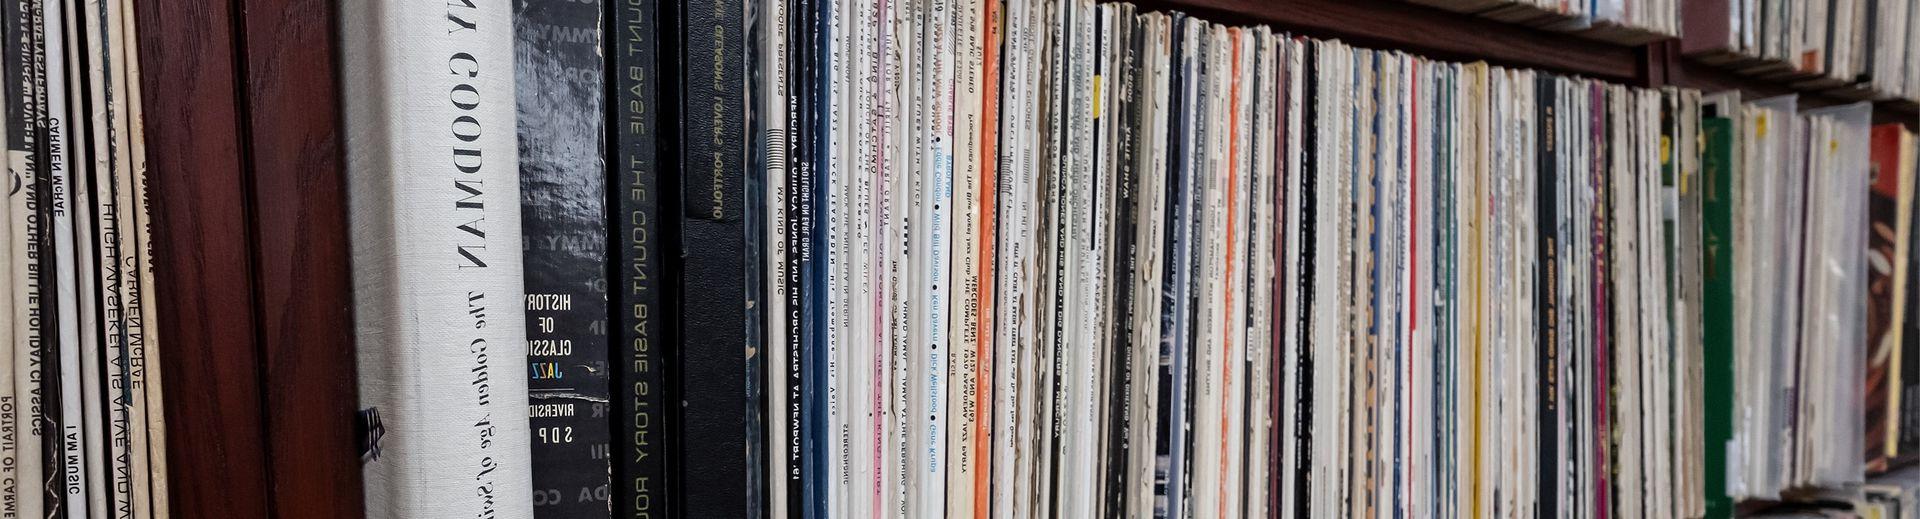 Shelves of records in the music library.